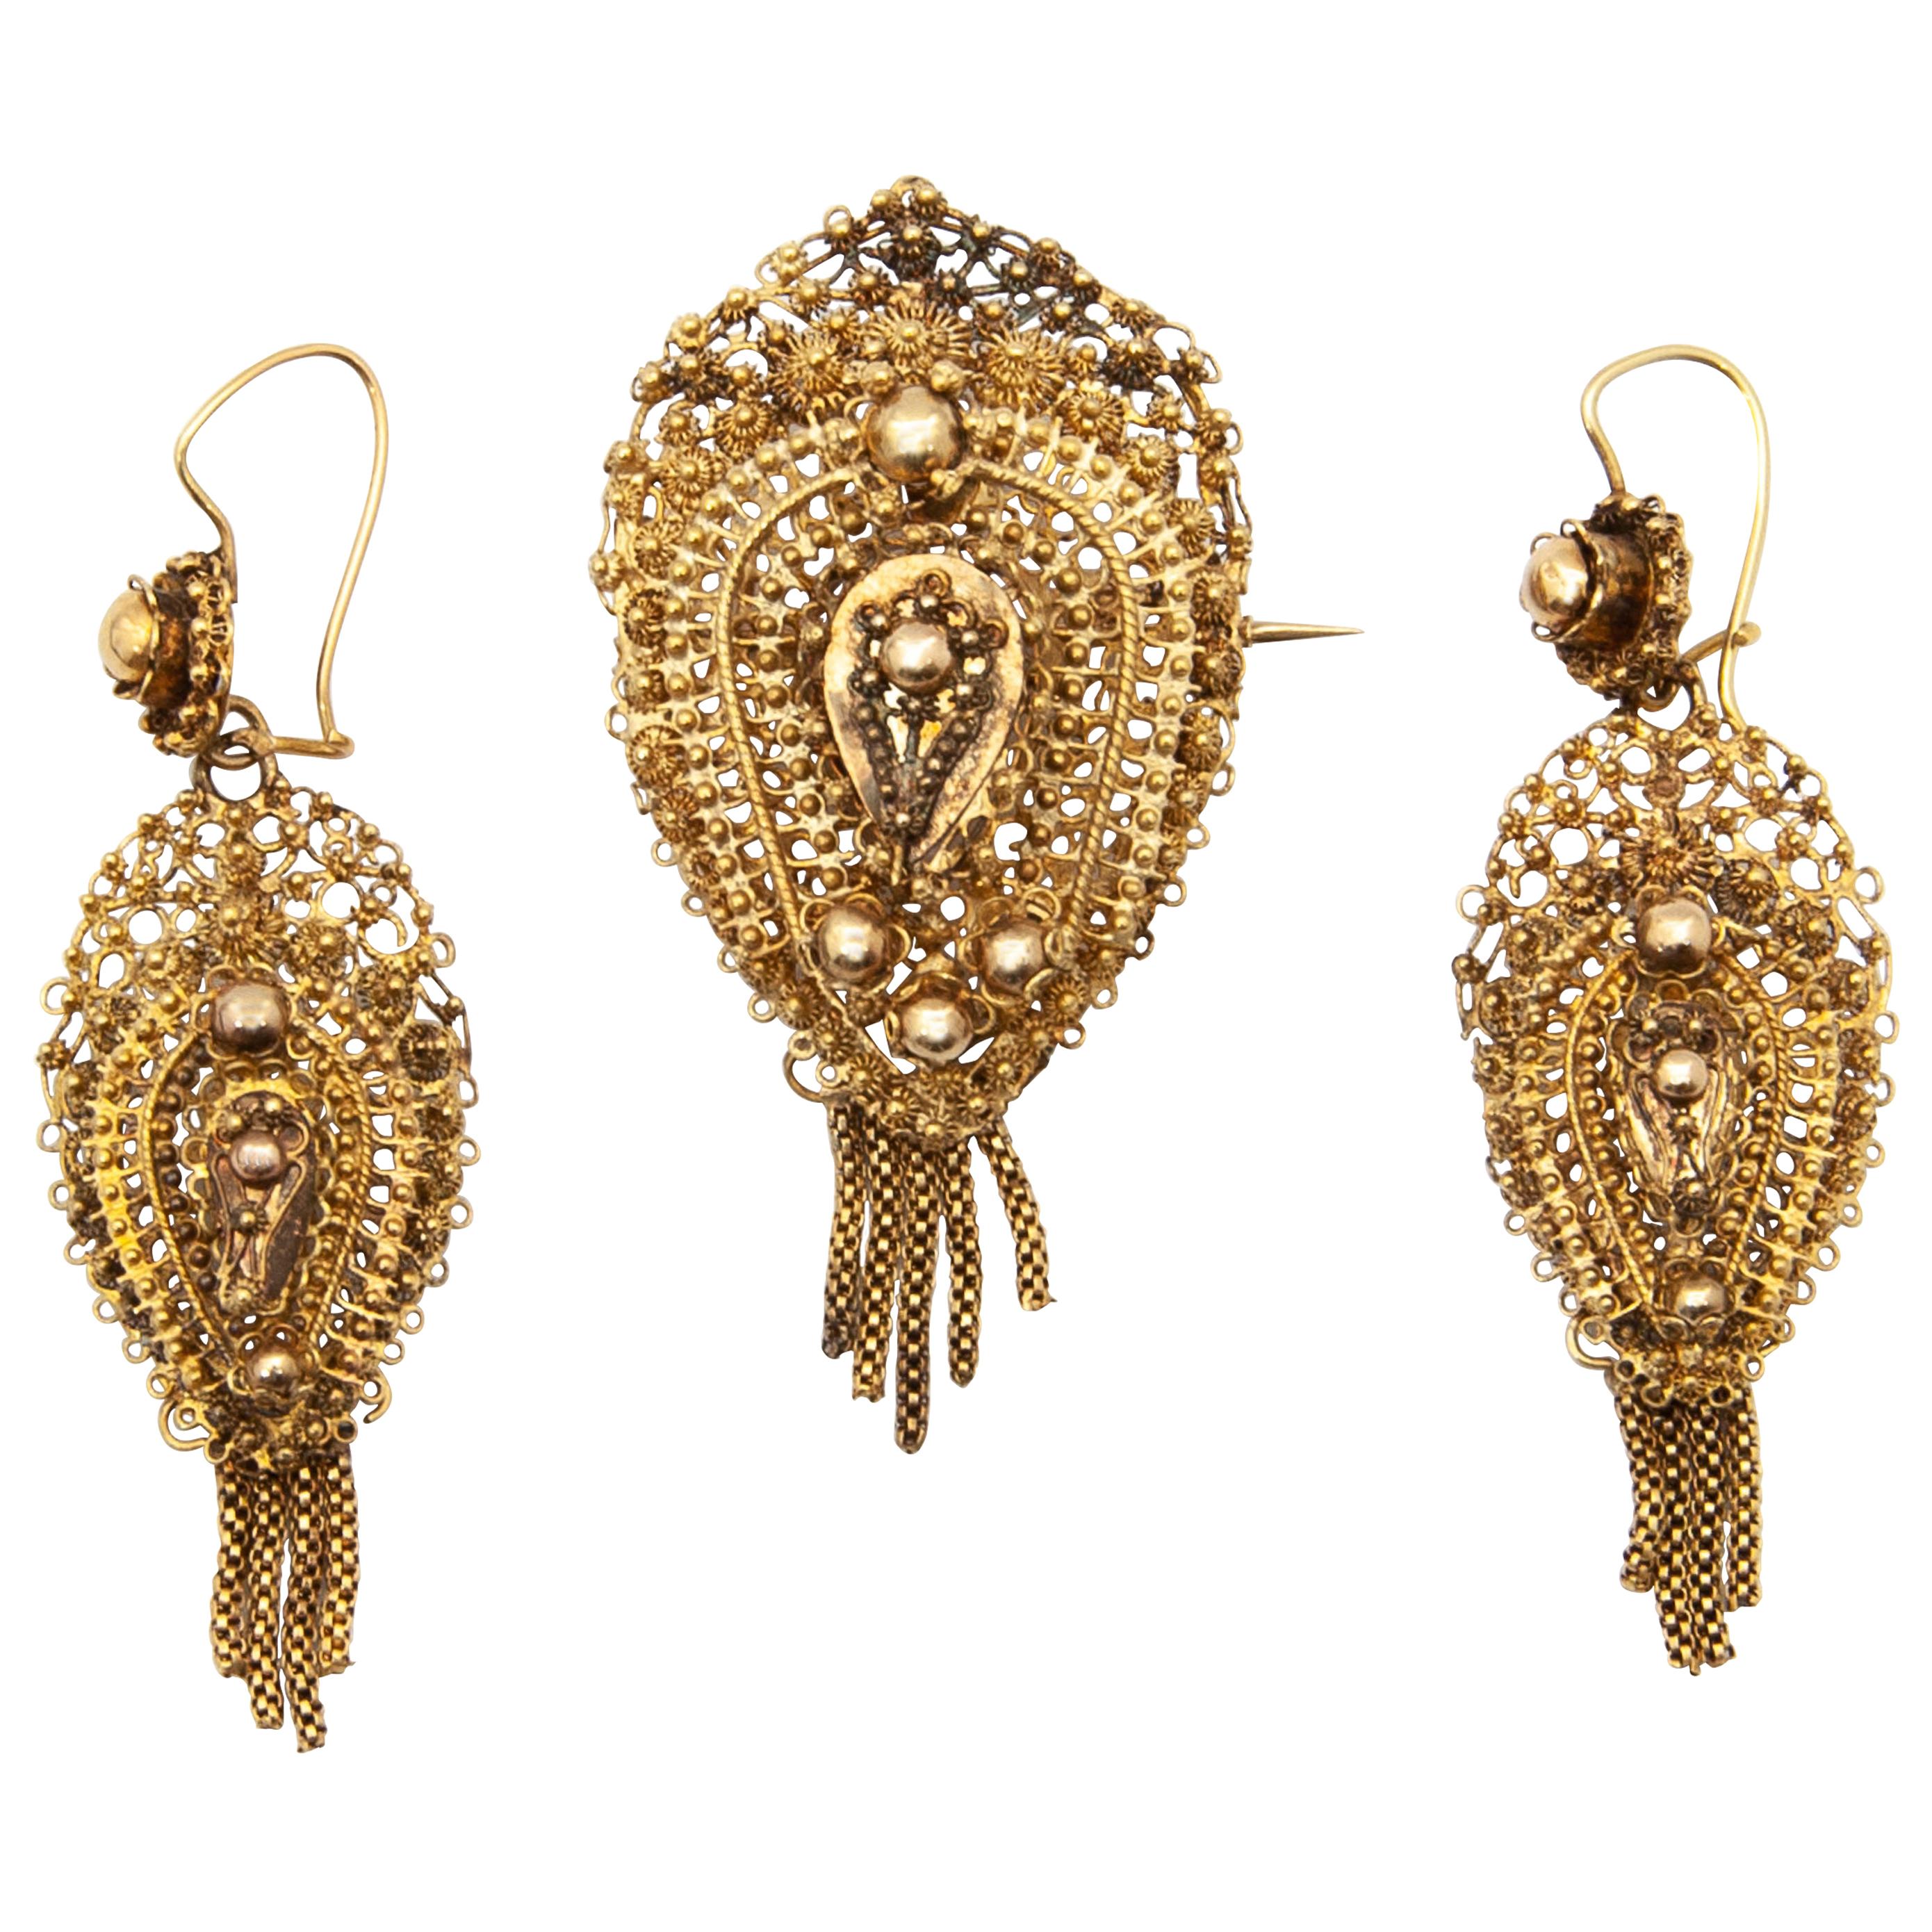 Antique 1880's 14K Gold Filigree Earrings and Brooch For Sale